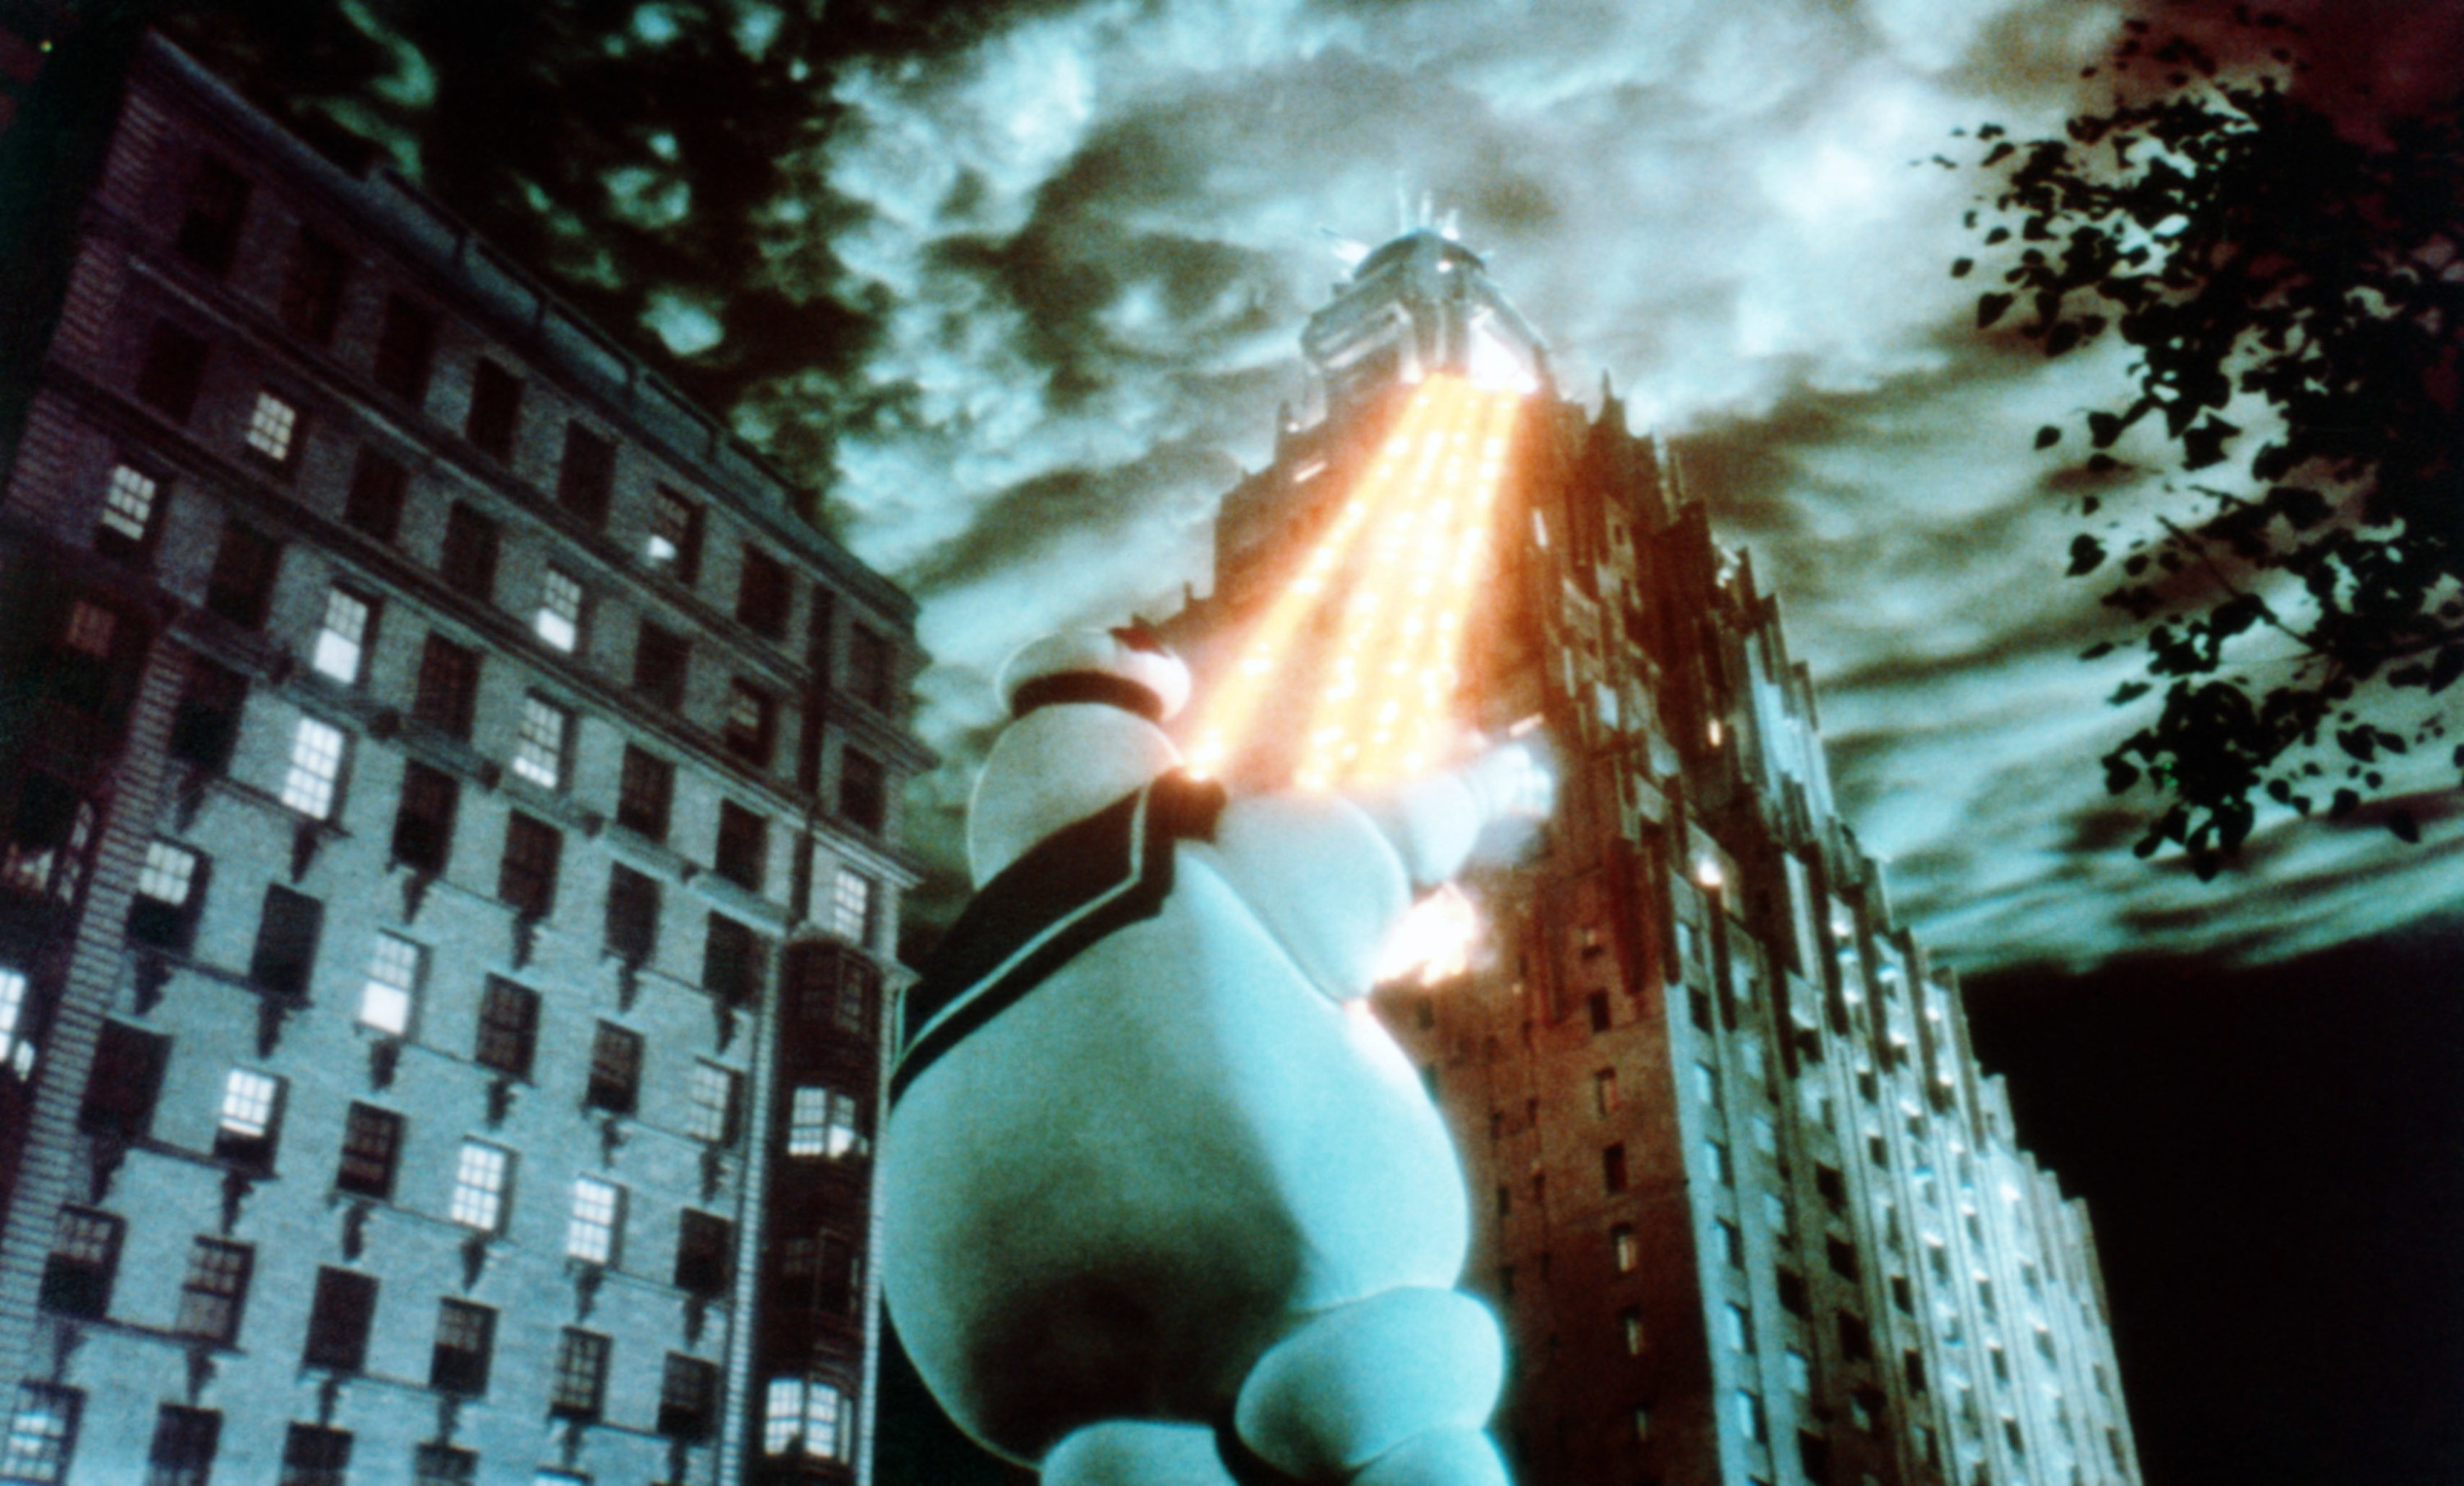 Ghostbusters scene with giant stay puft marshmallow man